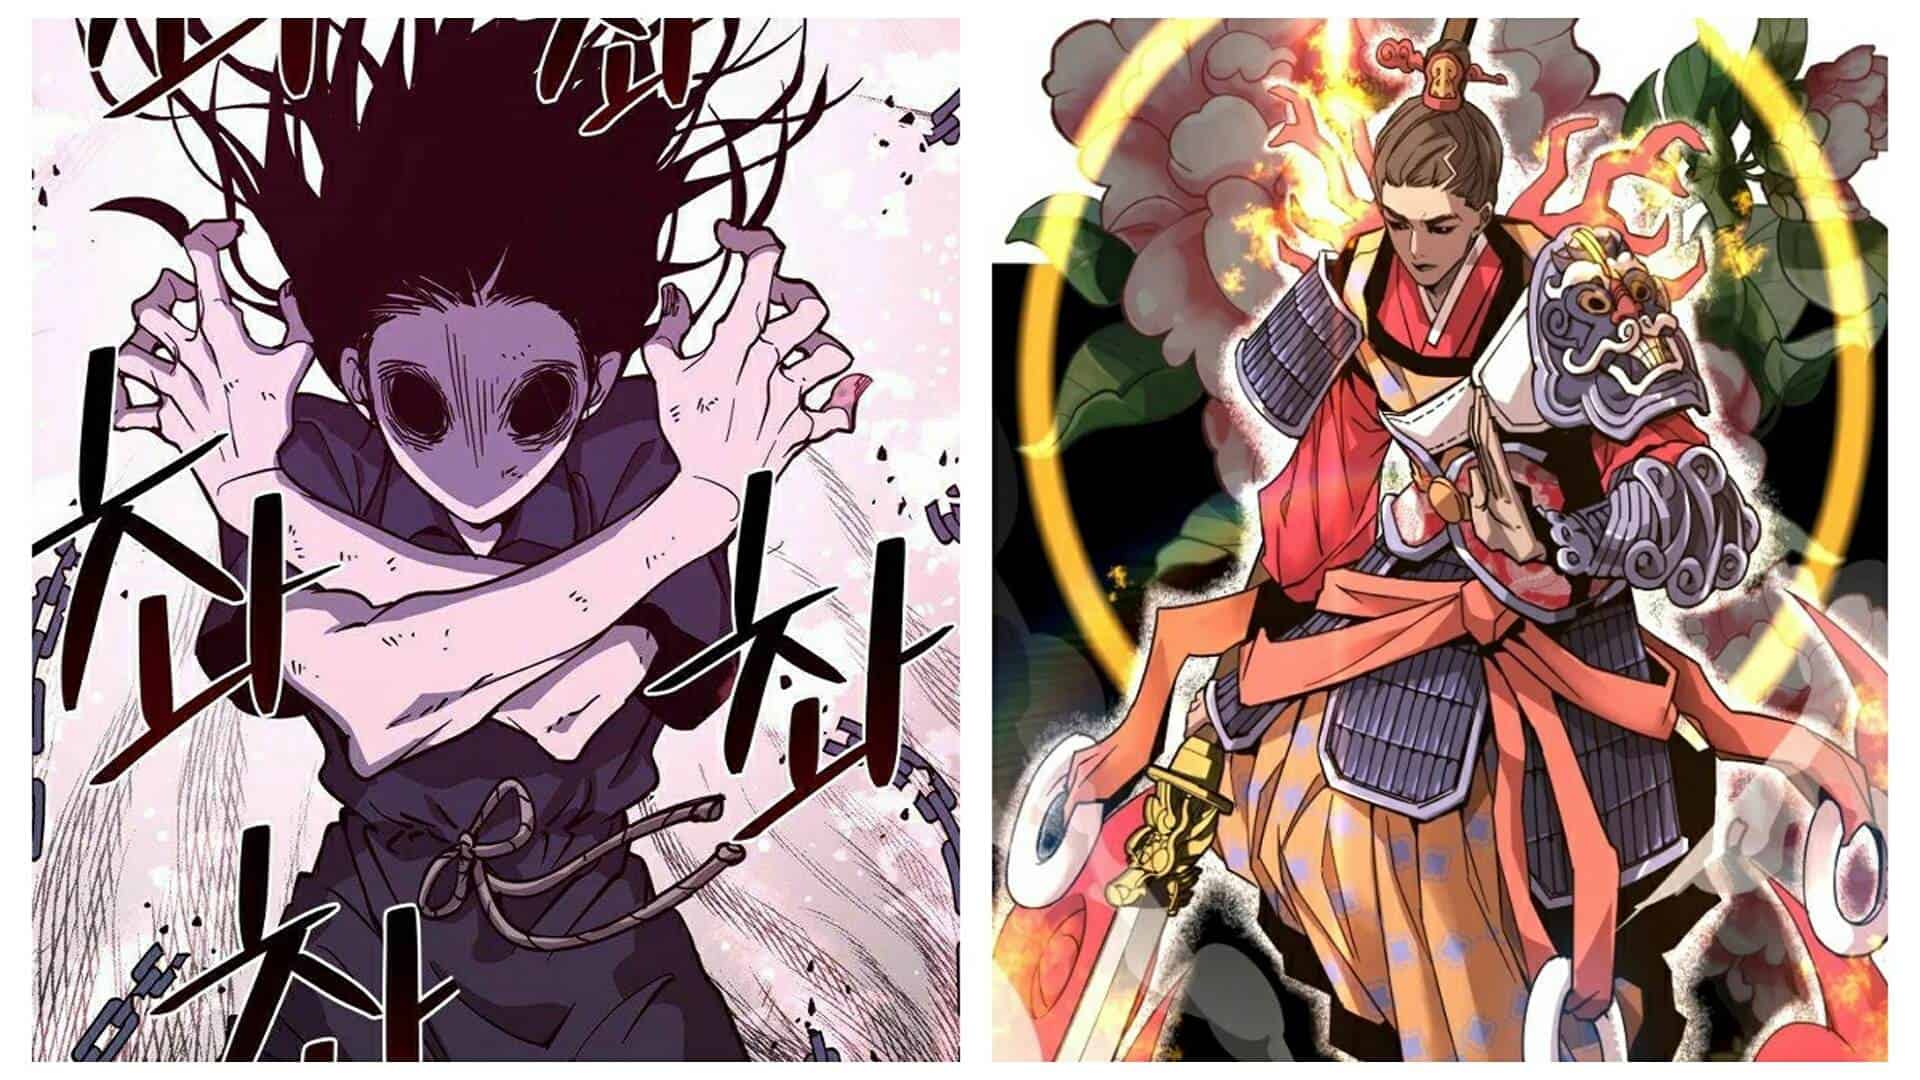 The Evil Spirit (Left) And The Divine General Summoned By Nak-Bin's Mother - The Shaman Chapter 6 Spoilers